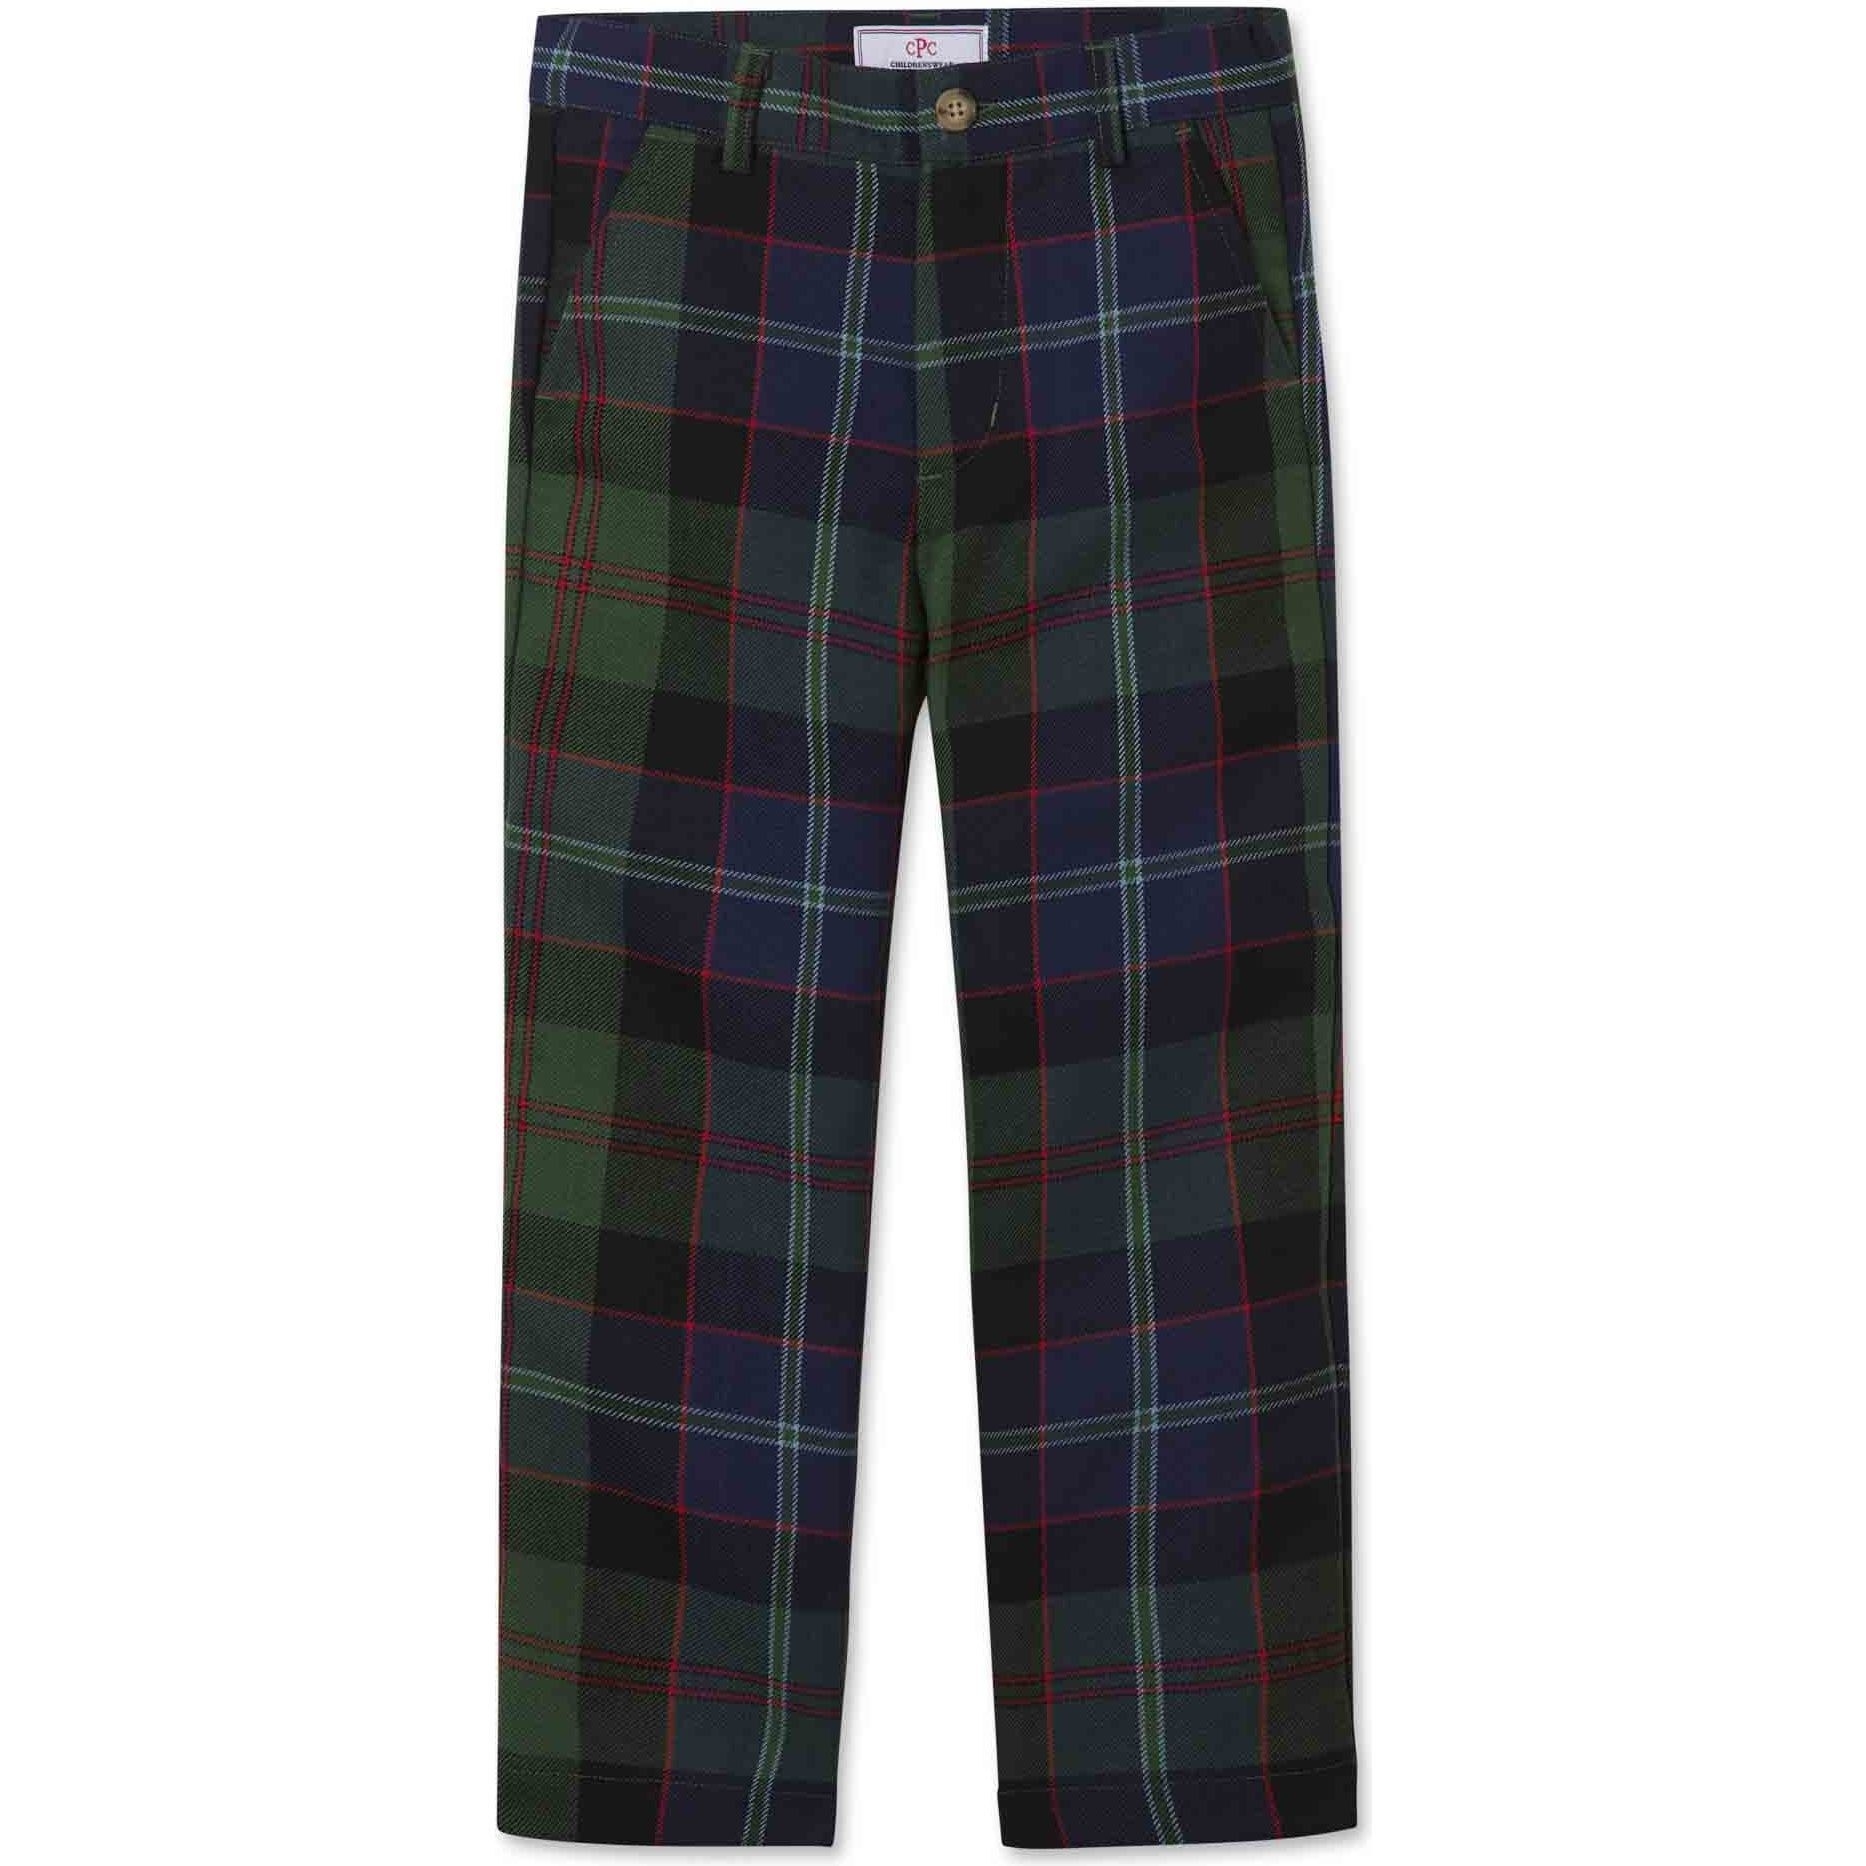 green and blue plaid pants